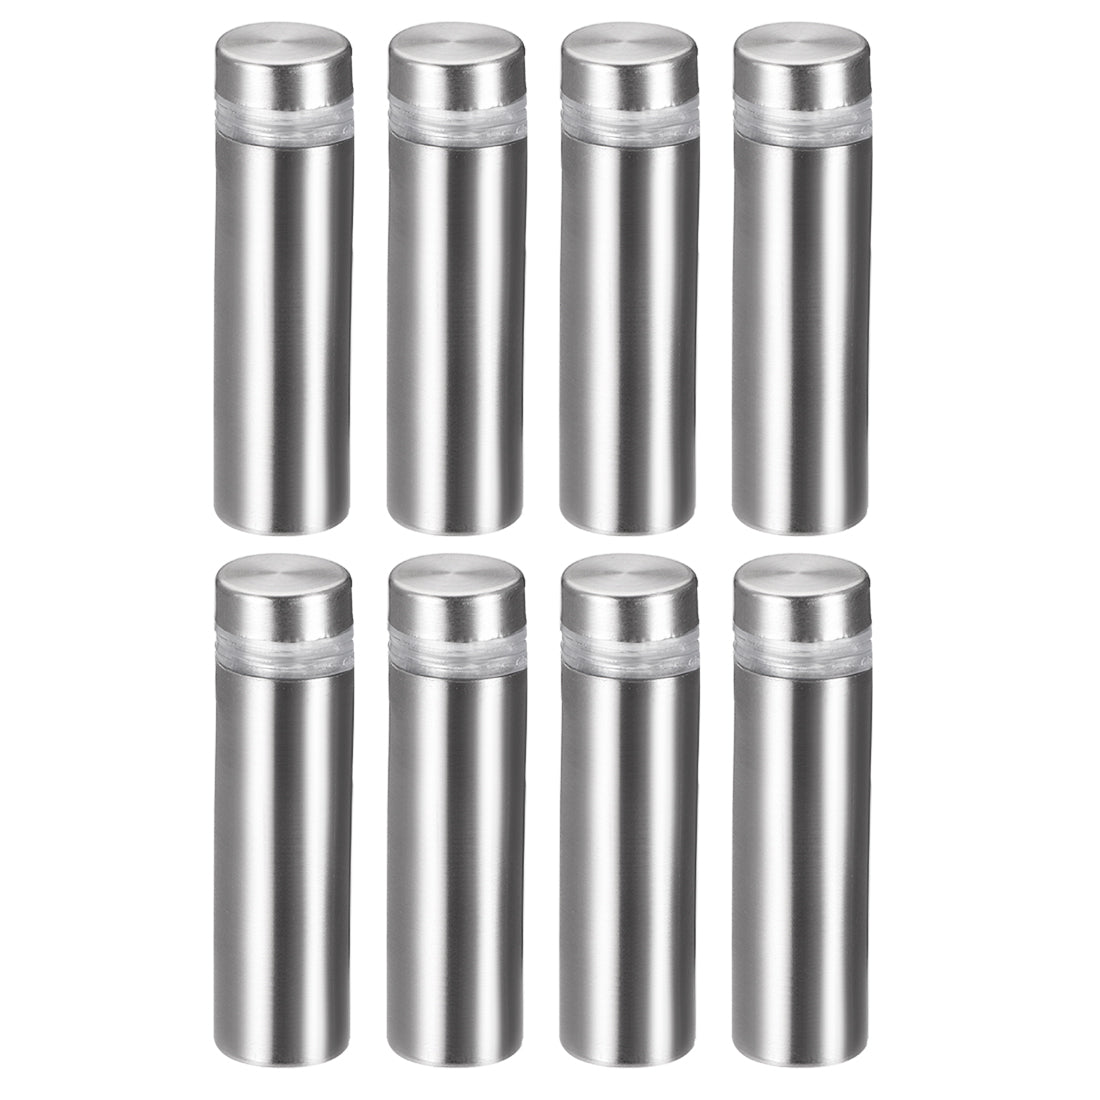 uxcell Uxcell Glass Standoff Mount Stainless Steel Wall Standoff Holder Advertising Nails 12mm Dia 43mm Length 8 Pcs